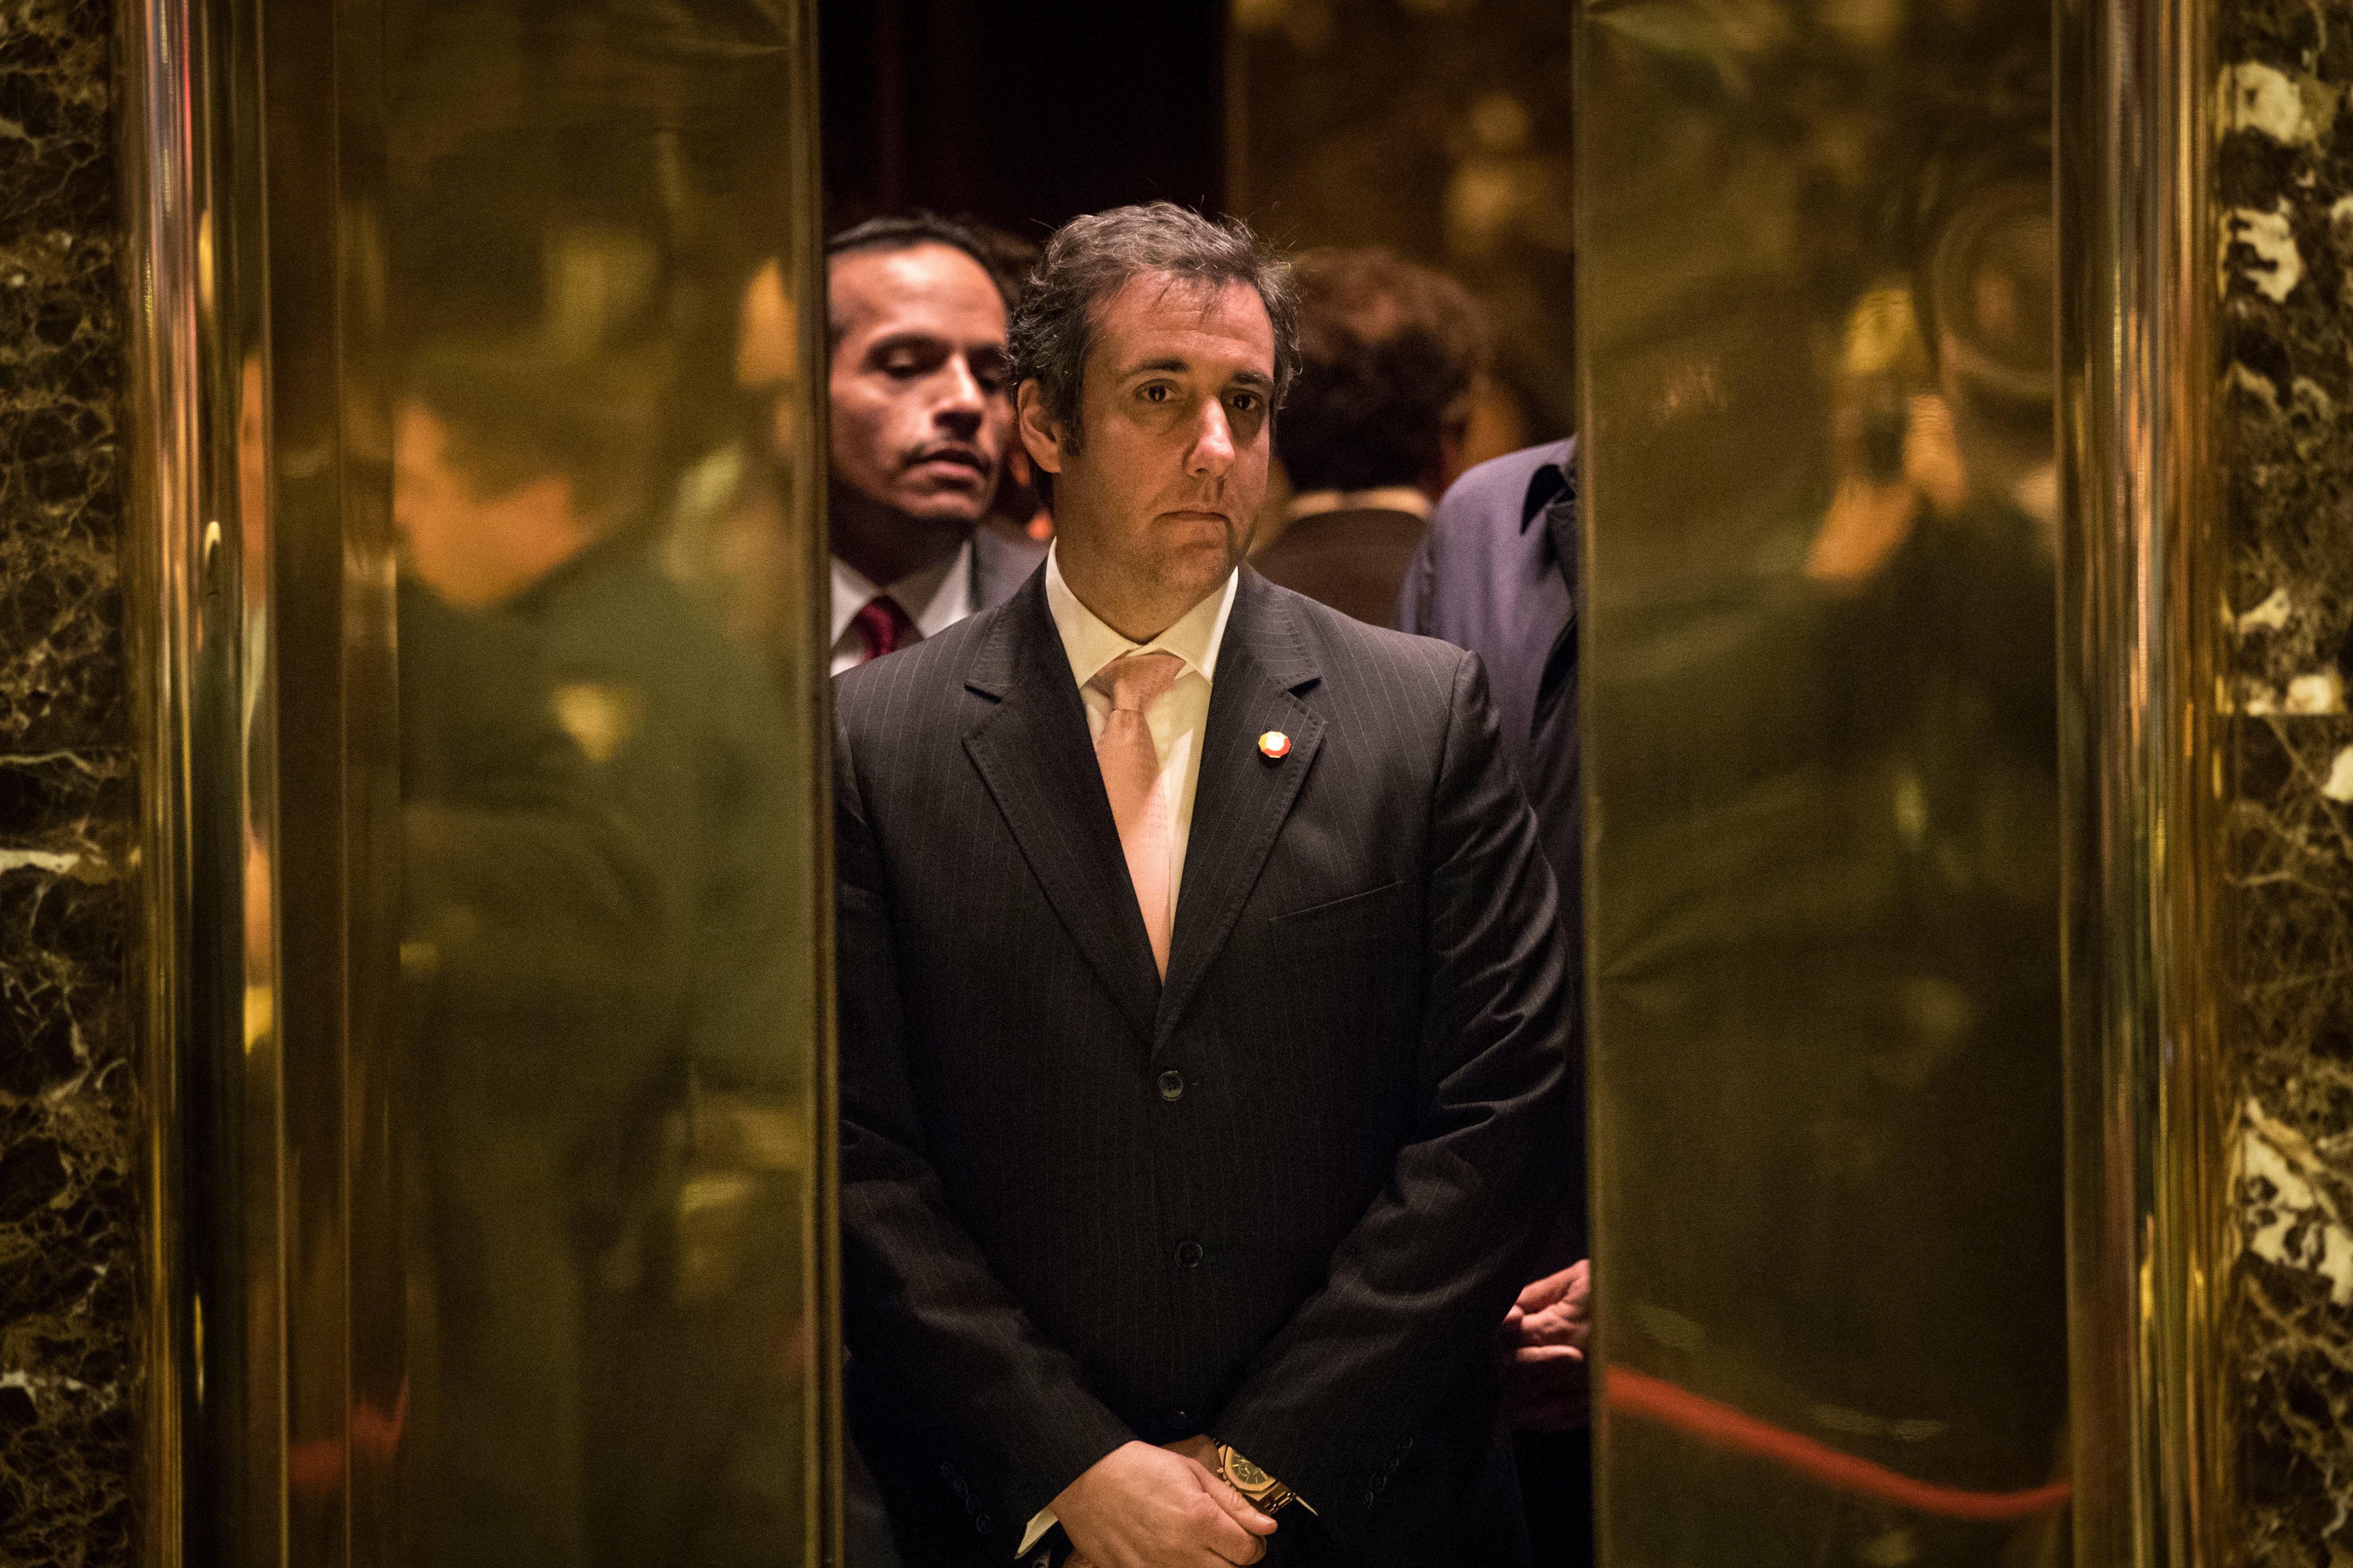 Michael Cohen, the former personal lawyer for President Donald Trump, gets into an elevator at Trump Tower, Dec. 12, 2016 in New York City. (Drew Angerer—Getty Images)